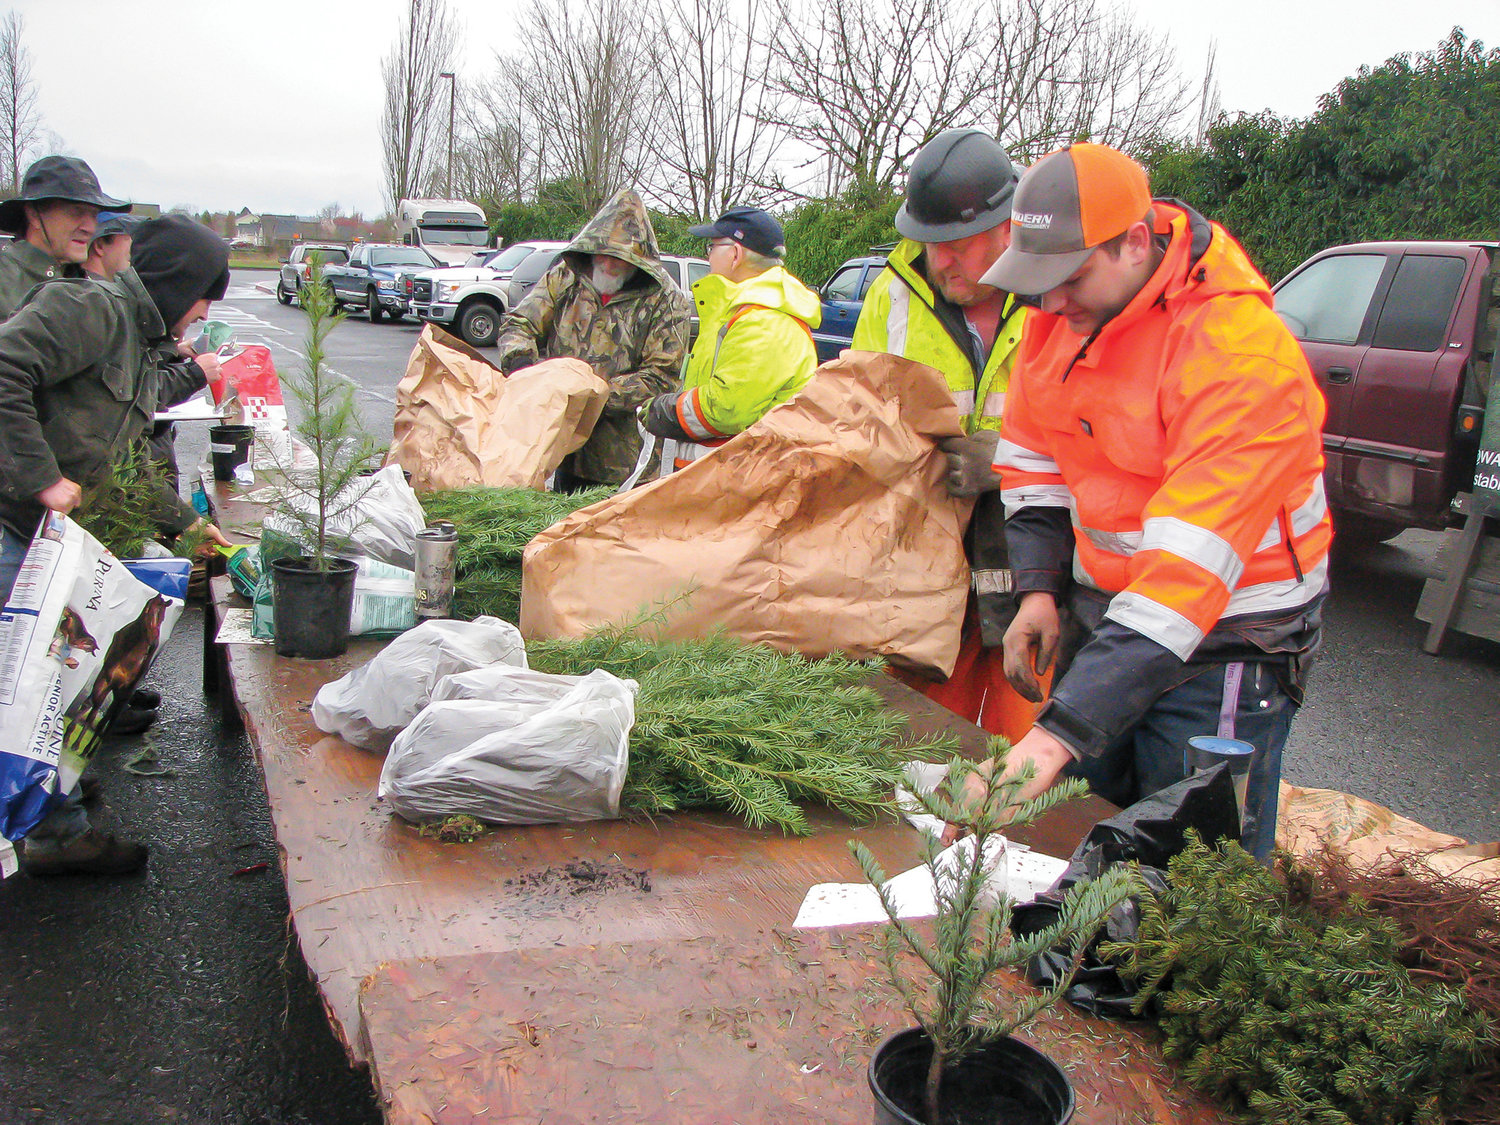 The popular tree seedling sale will take place again this year on Saturday, March 18, at the parking lot of Albertsons in Battle Ground. Around 30 members of the Clark County Farm Forestry Association will be on hand to conduct the sale which benefits forestry projects and scholarships.